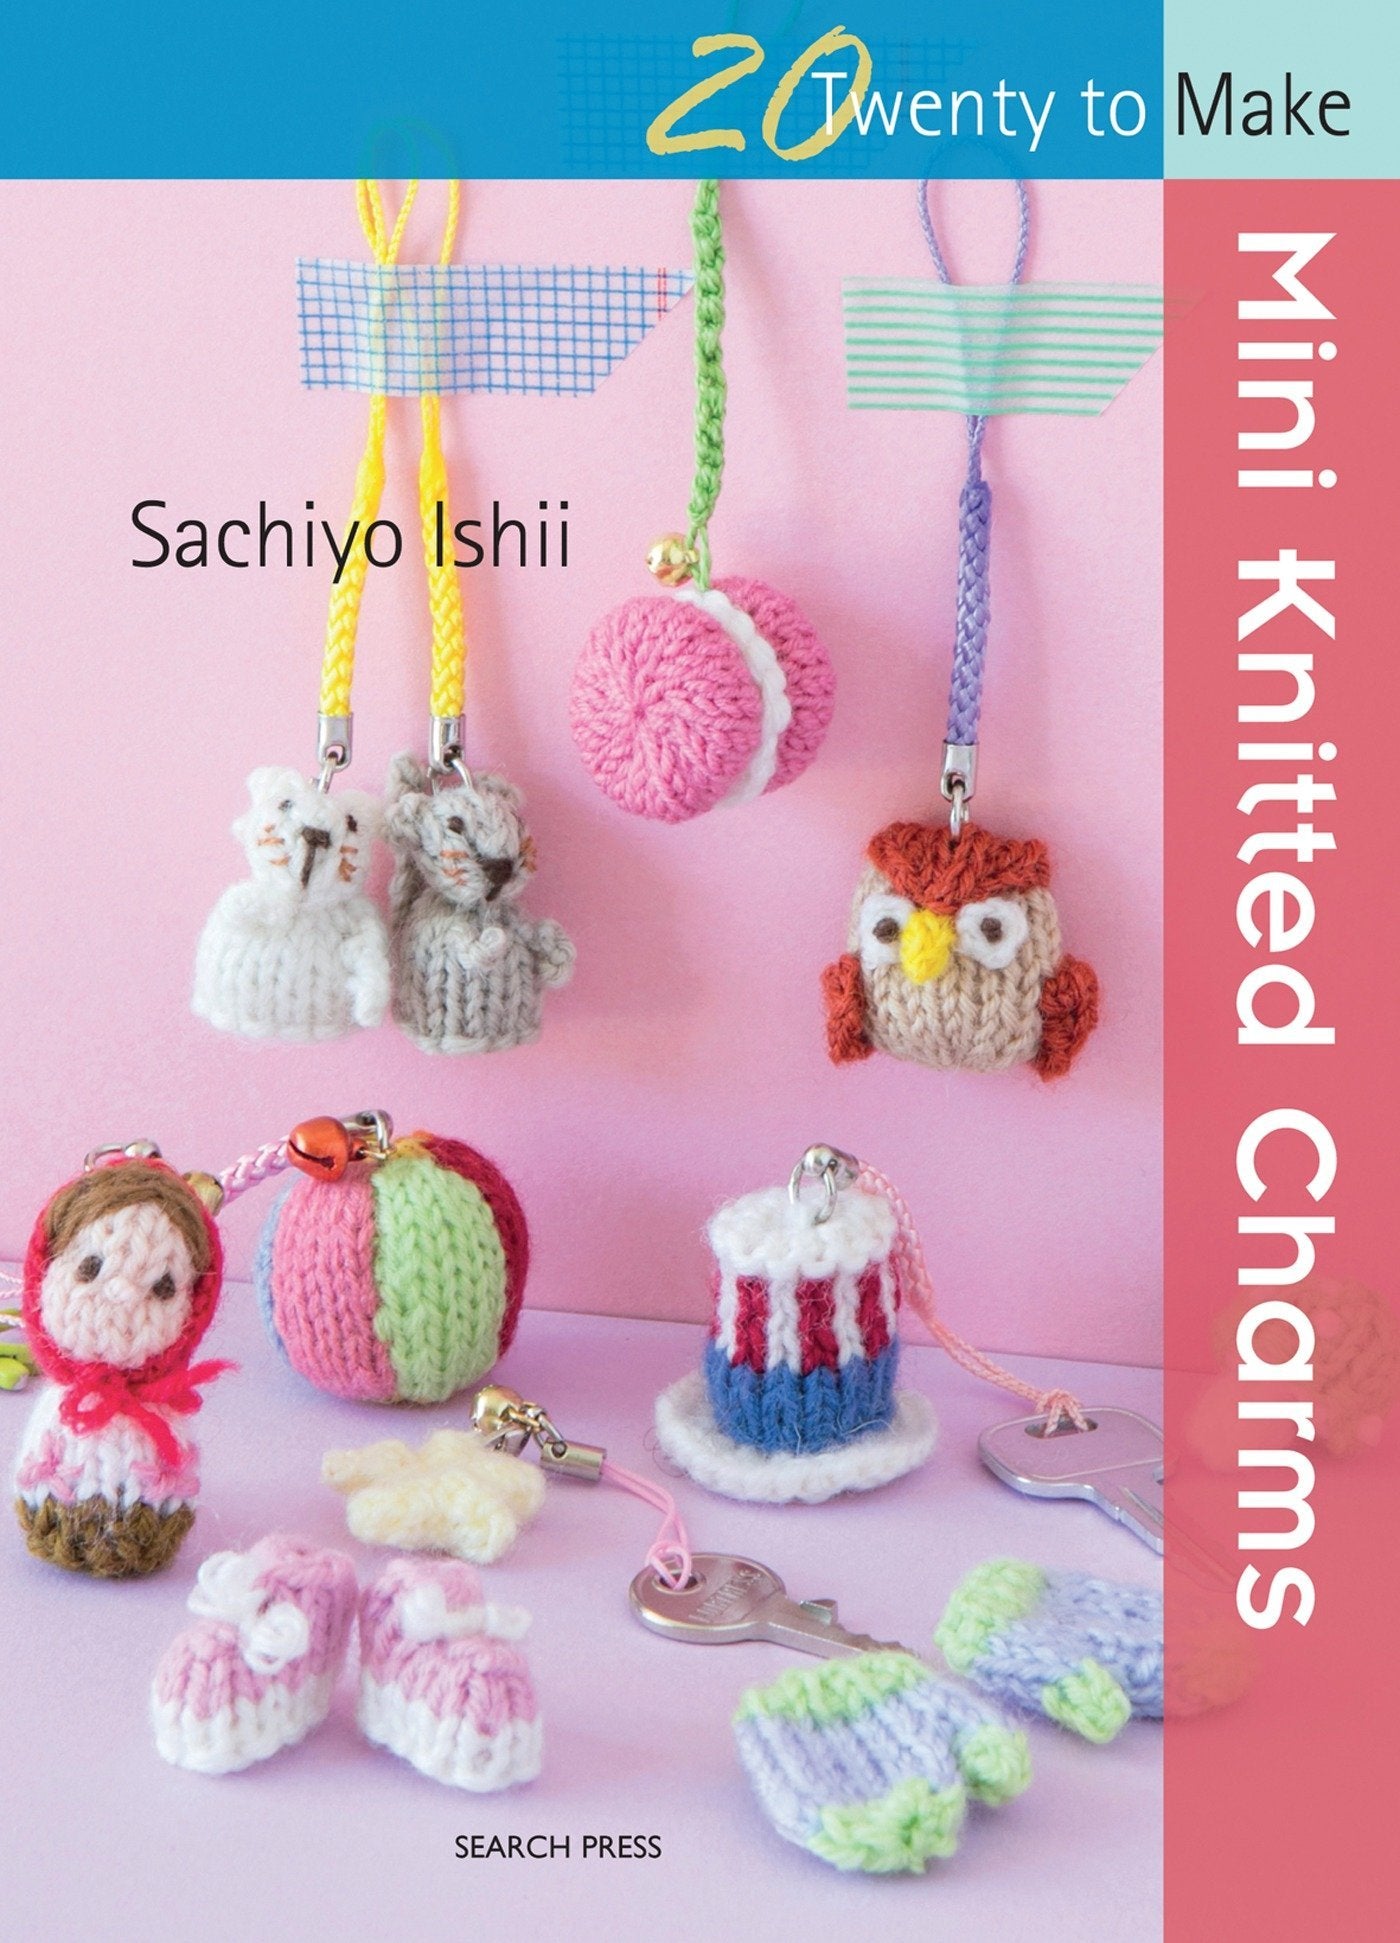 20 to Knit: Mini Knitted Charms Book (Twenty to Make)